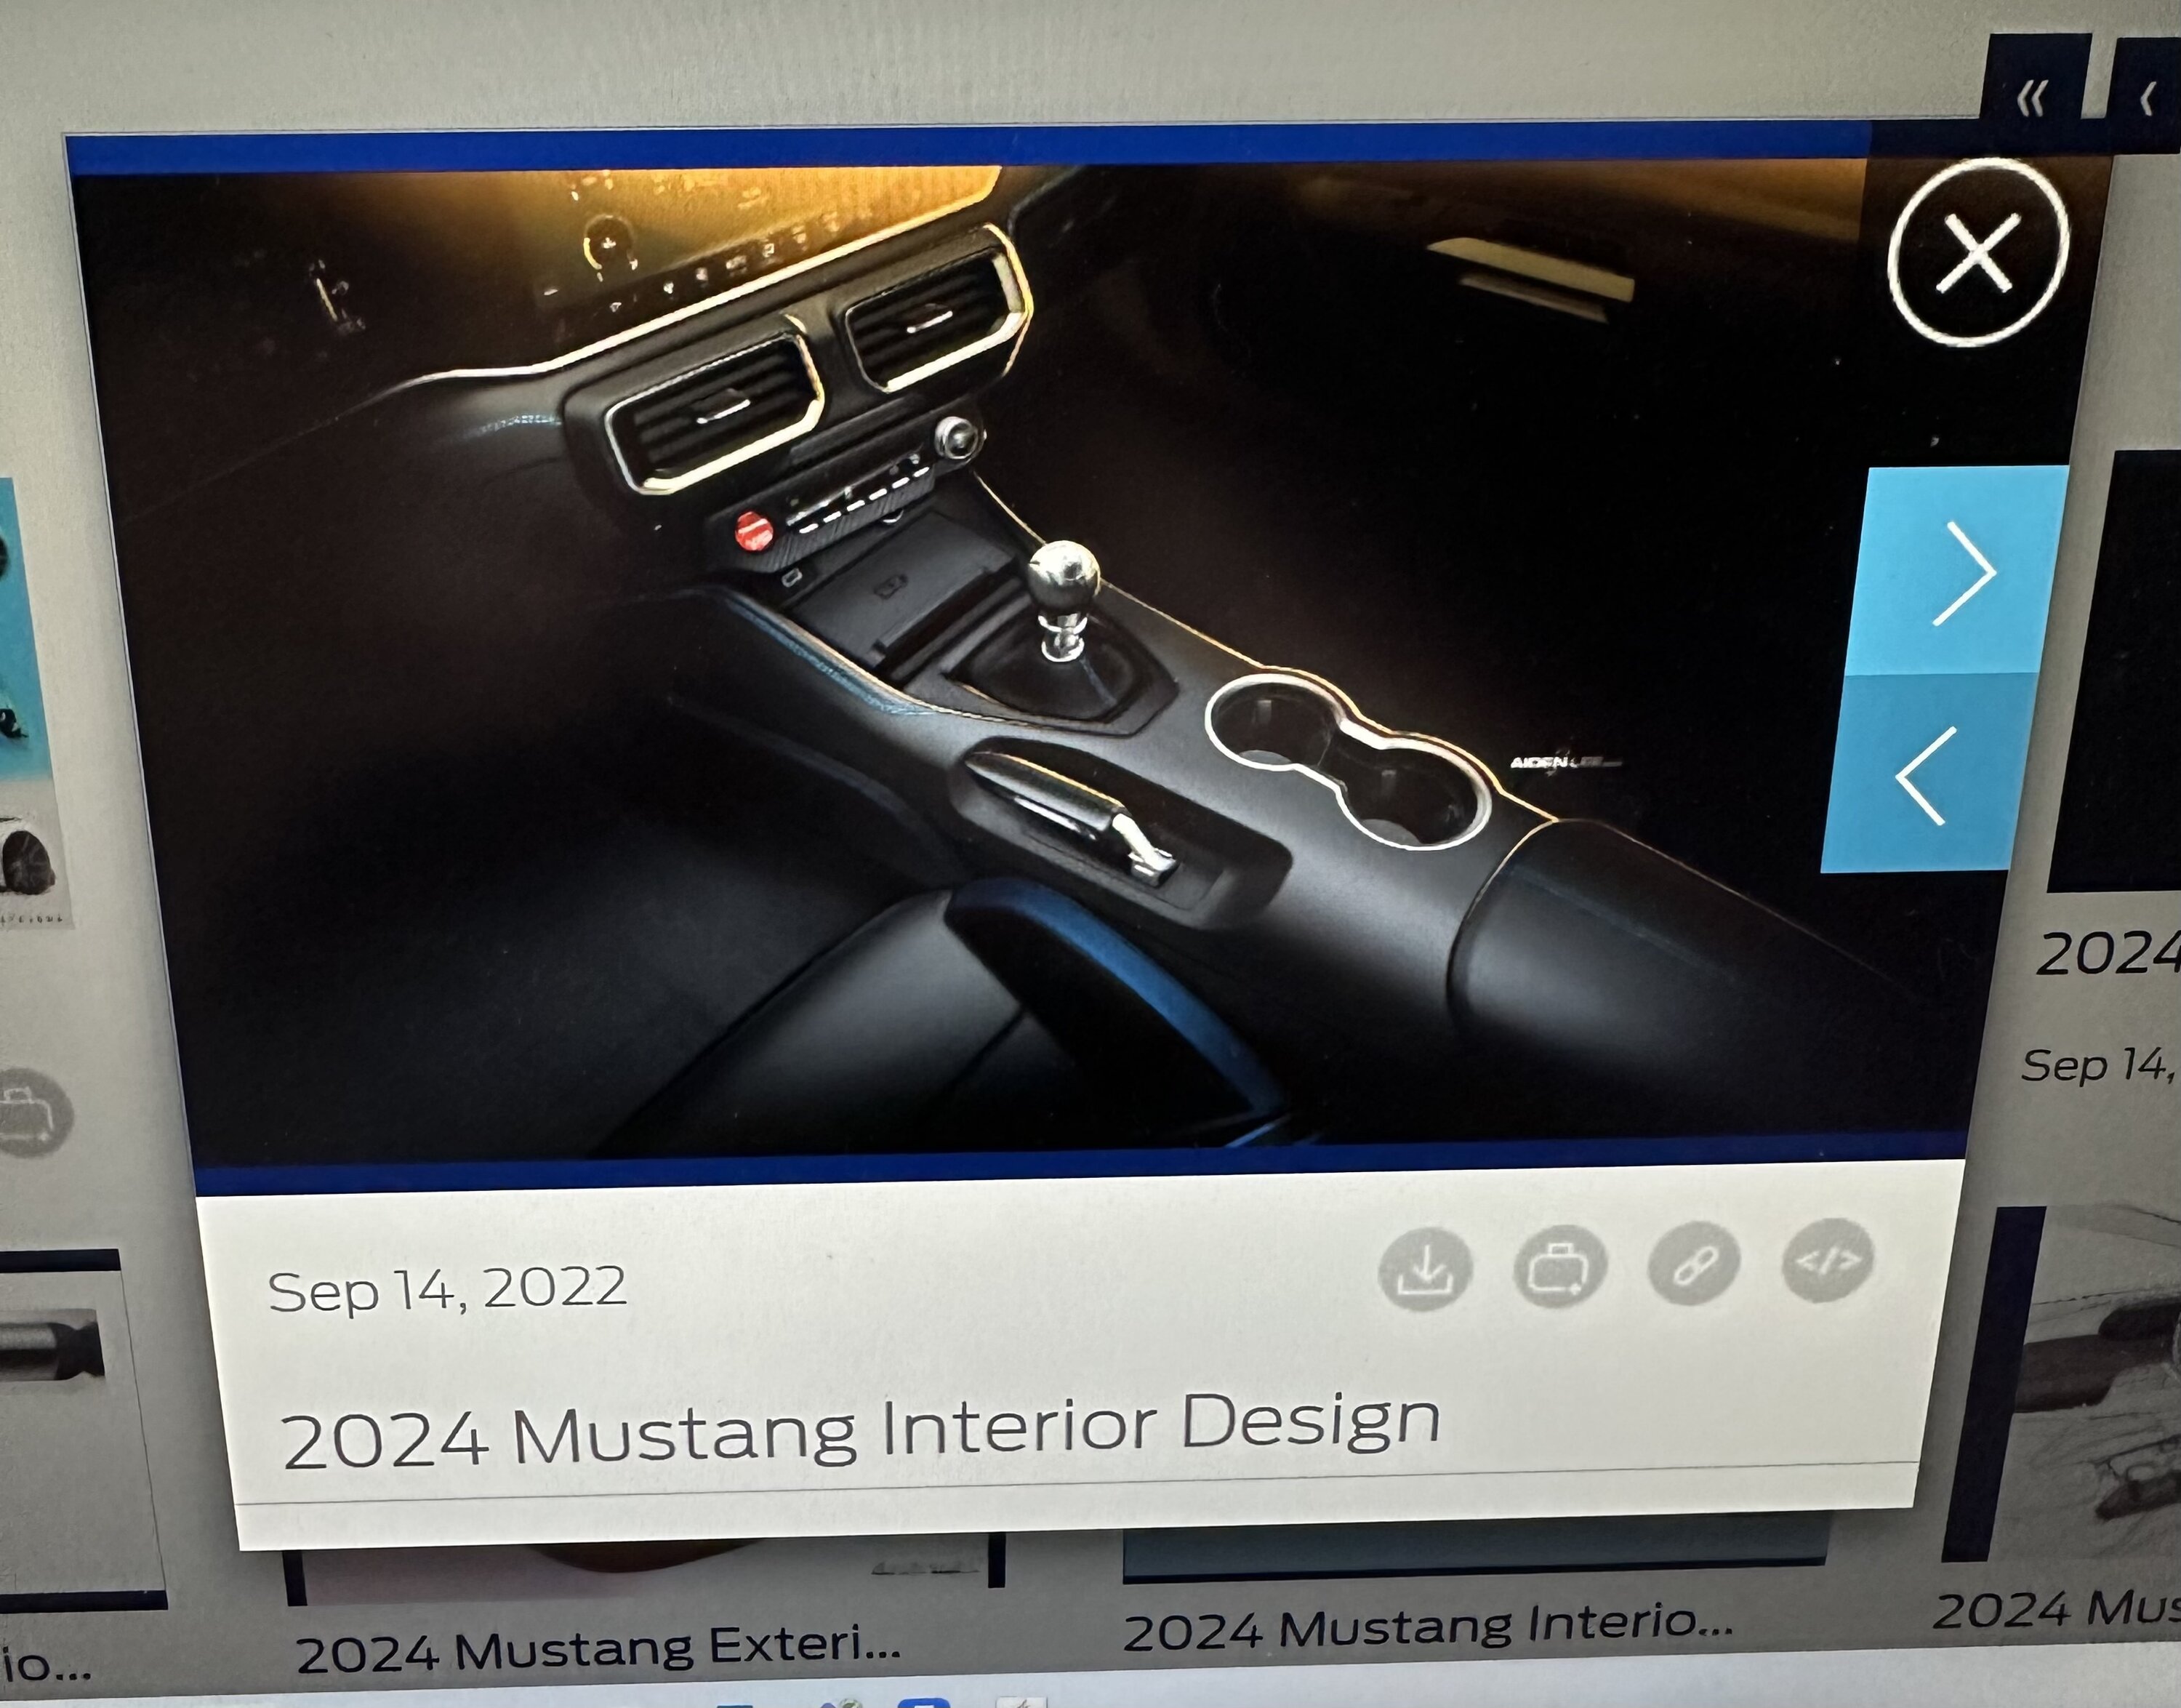 S650 Mustang If I ordered an Atlas Blue car with 401A with black interior what color do you think the accent stitching will be? 5CA54528-DC19-4719-BB68-4505249EF174